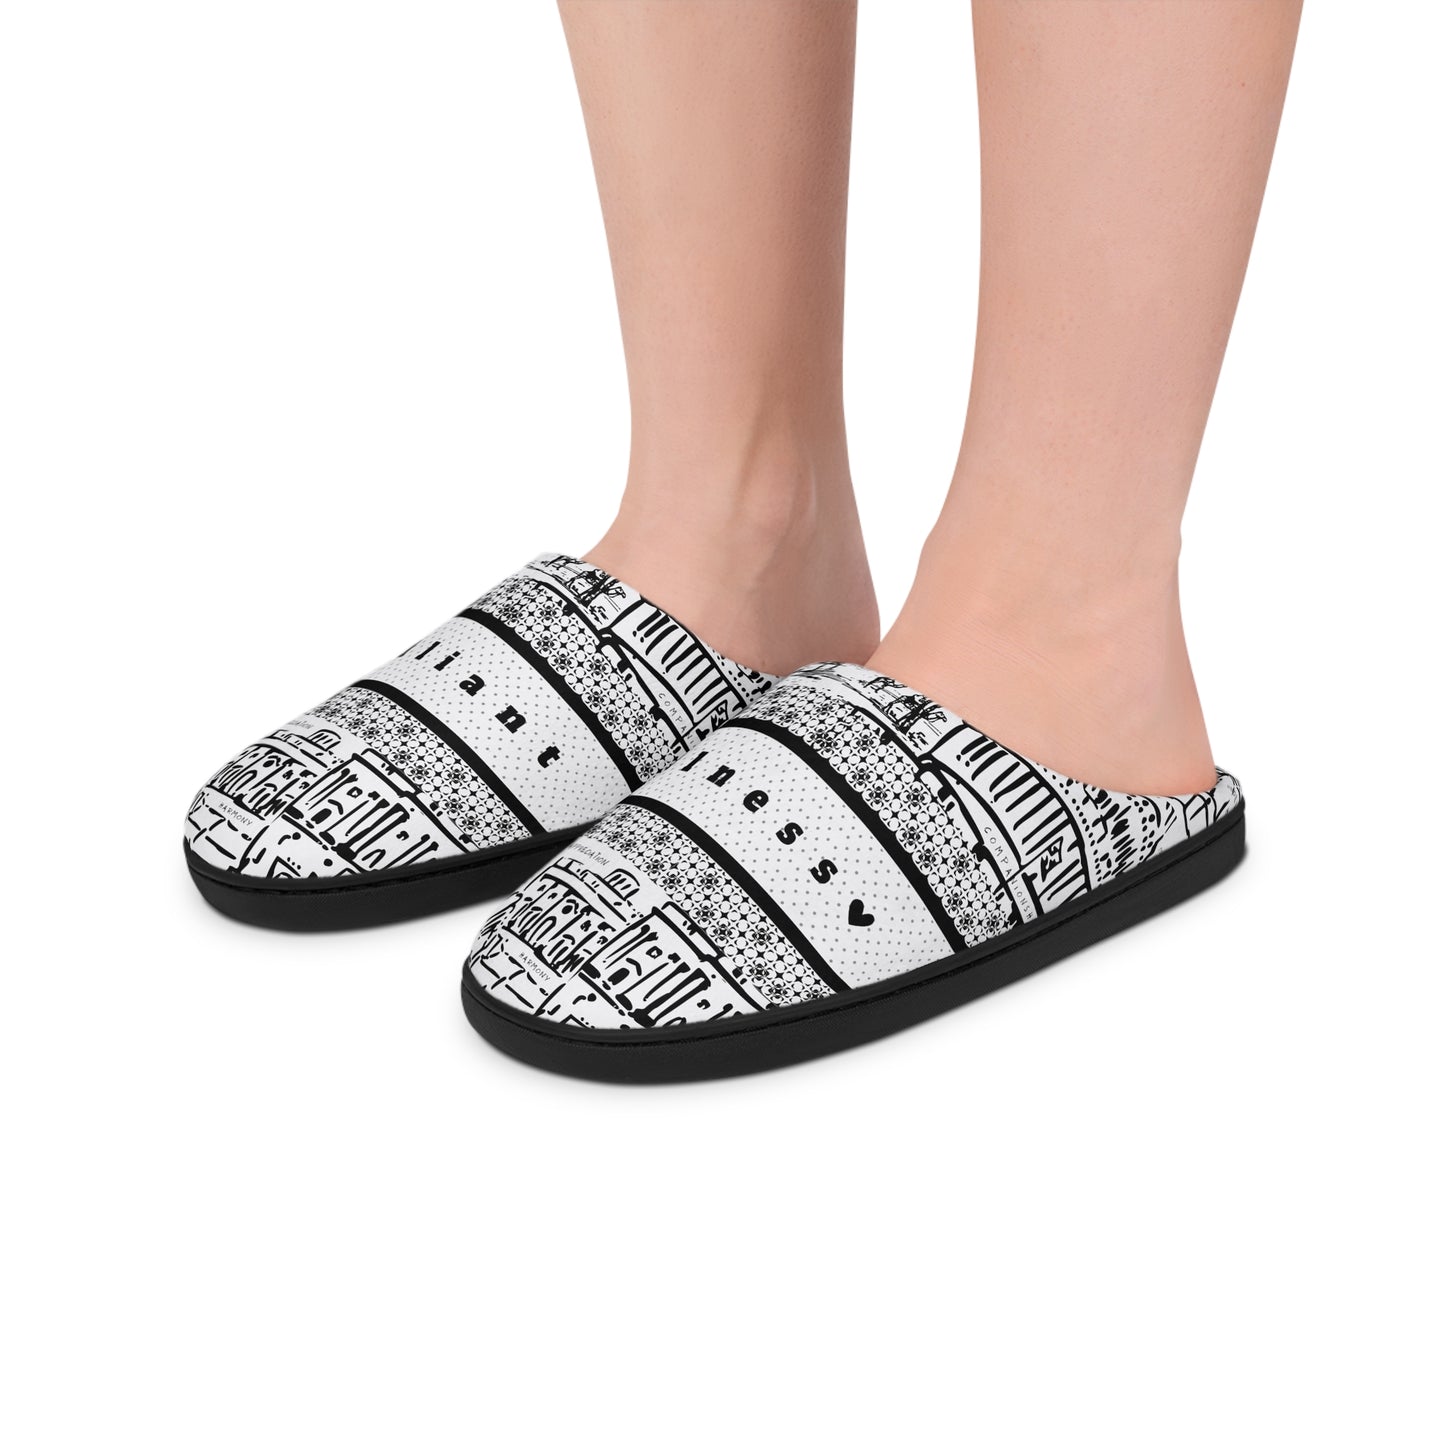 Illustrated Indoor Slippers